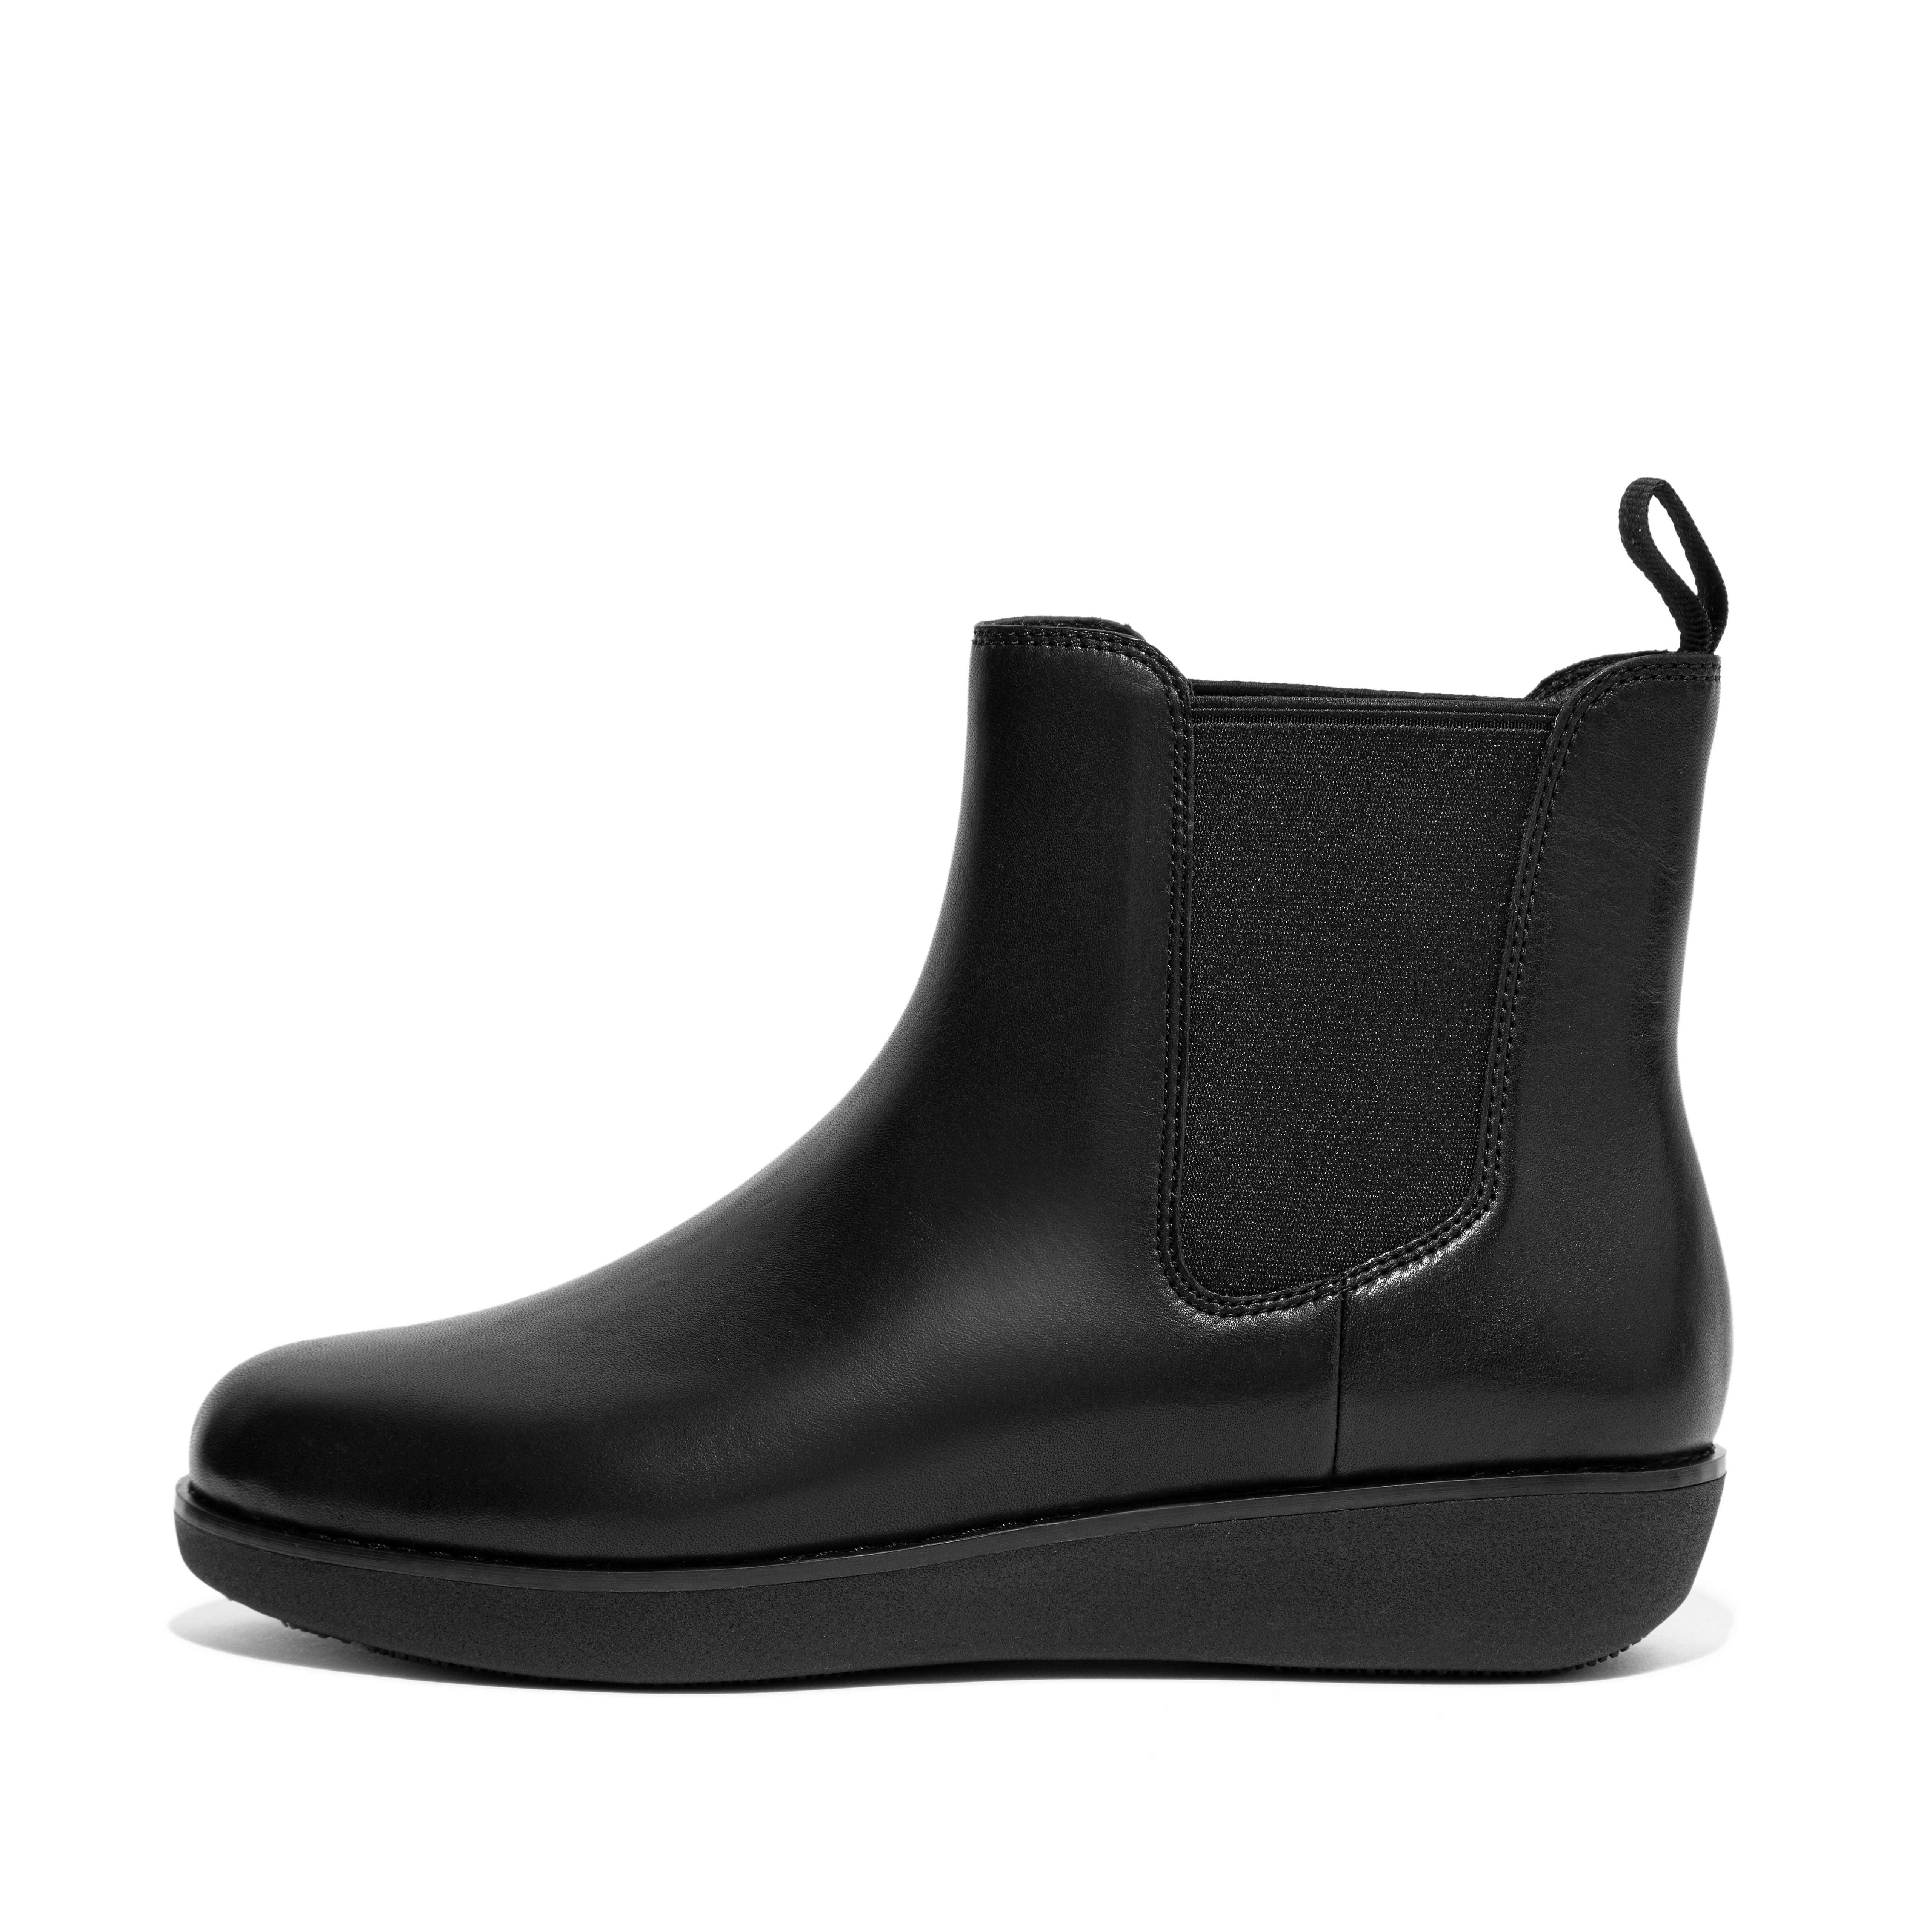 Sumi Leather Ankle Boots | Women's Ankle Boots | FitFlop US | FitFlop US